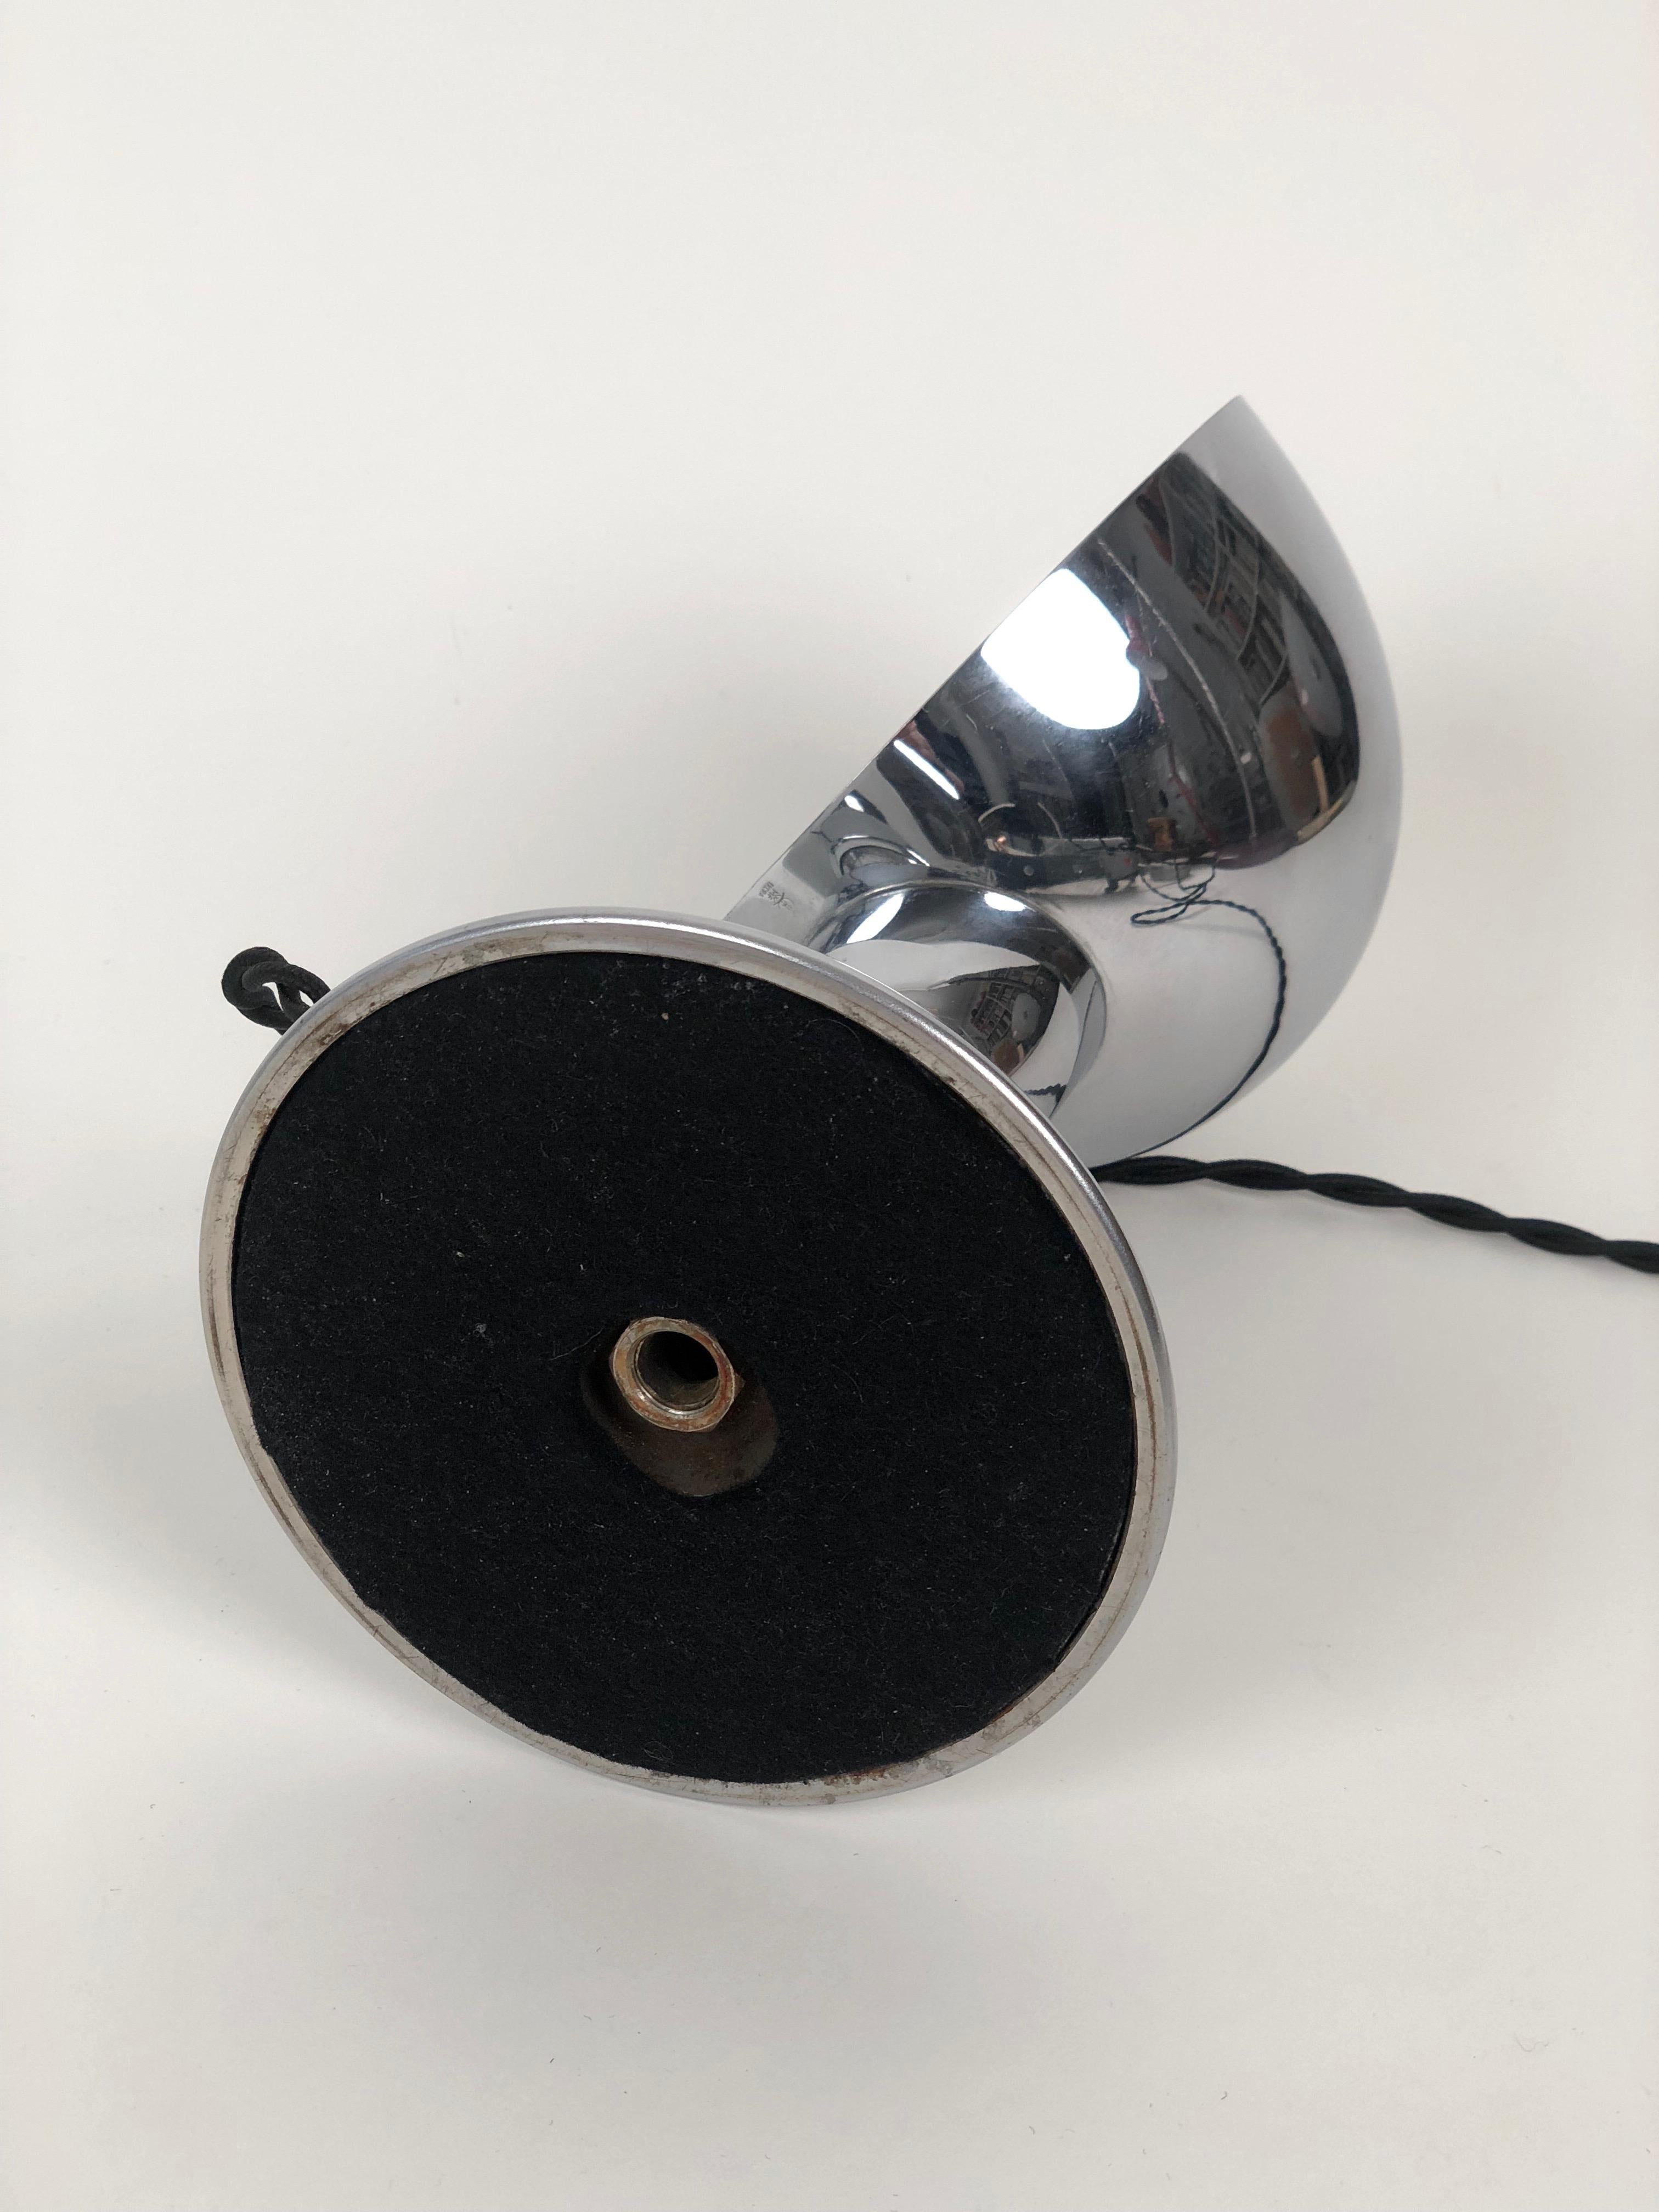 WMF Ikora Table Lamp / Wall Reflector in Bauhaus Manner from the 1930s Chrome In Good Condition For Sale In Vienna, Austria